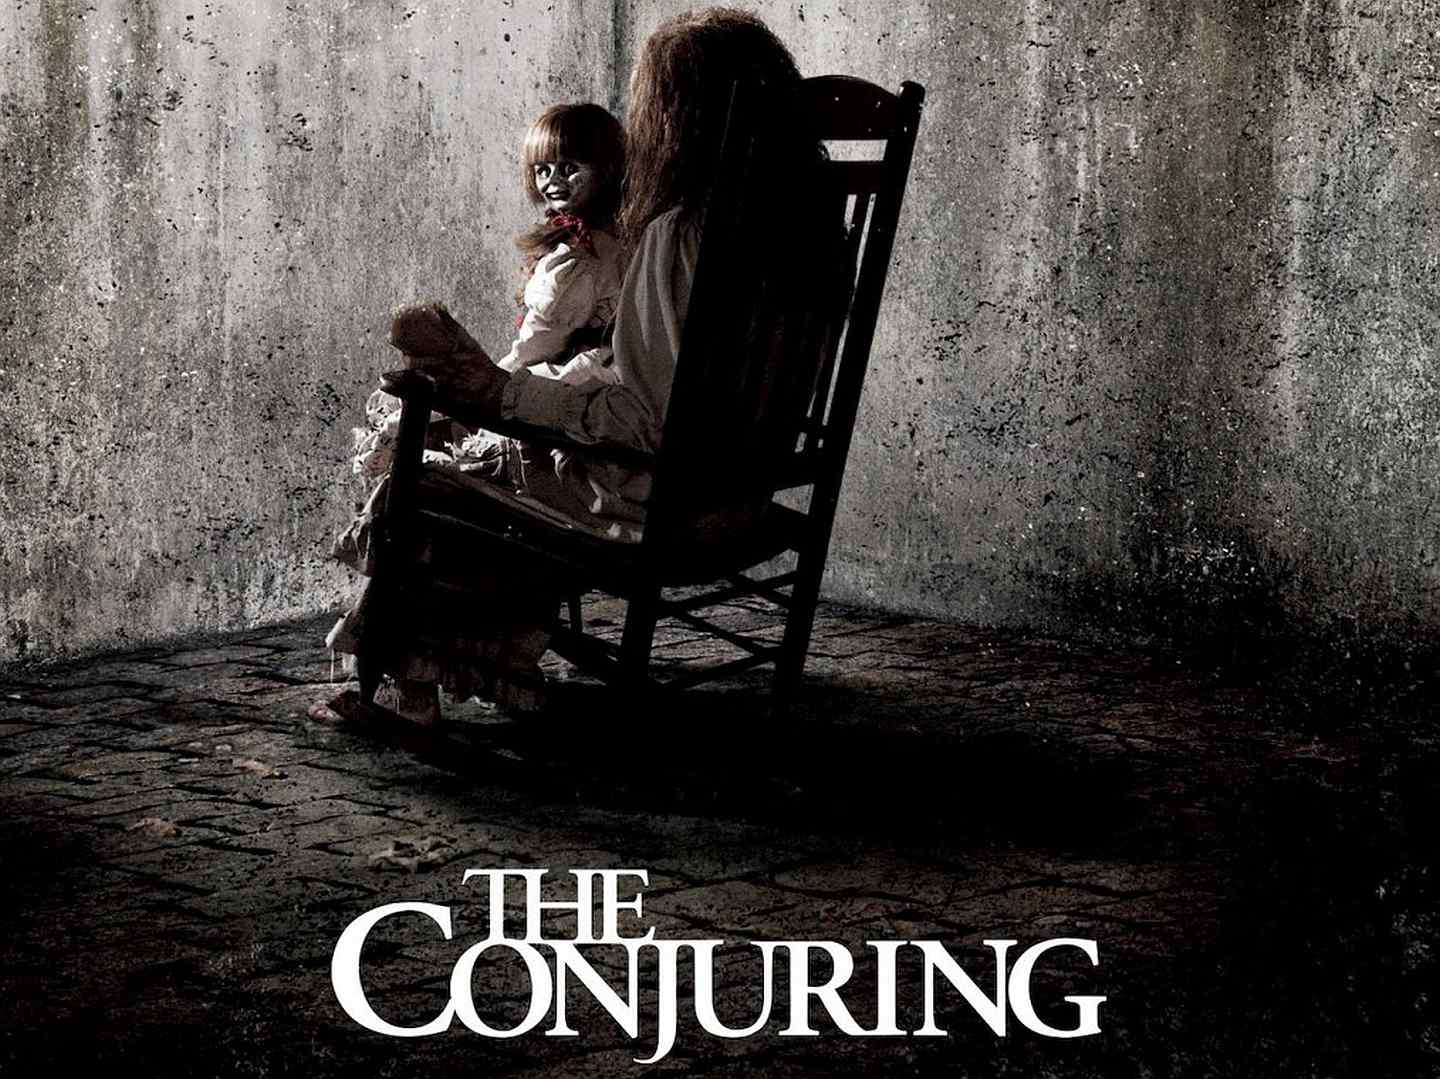 the conjuring 1 full movie download mp4